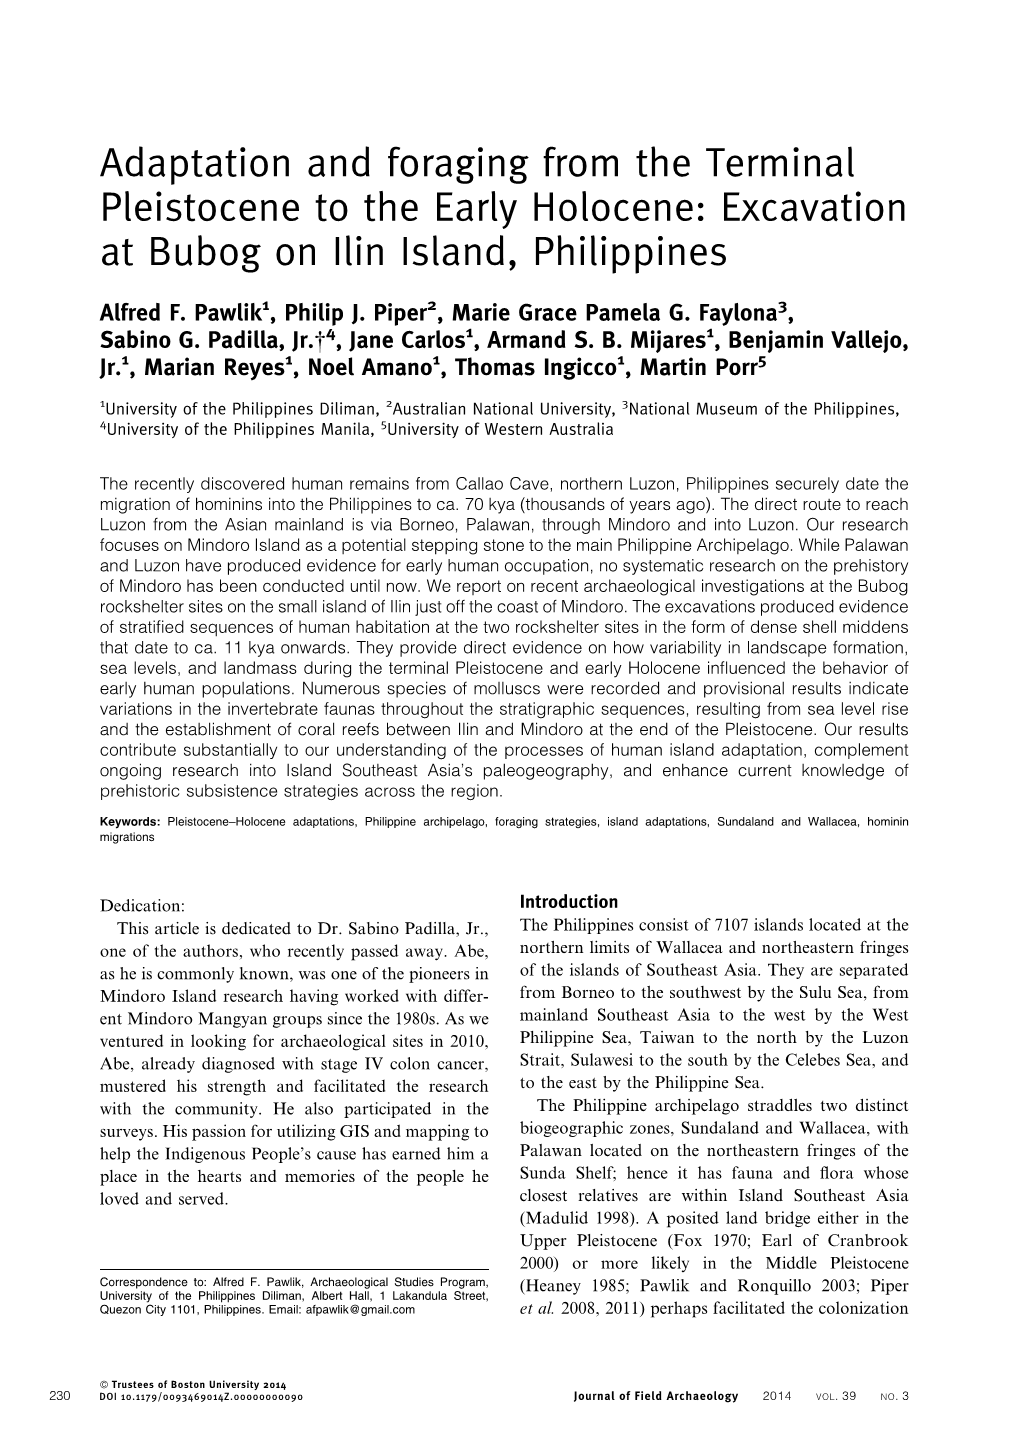 Adaptation and Foraging from the Terminal Pleistocene to the Early Holocene: Excavation at Bubog on Ilin Island, Philippines